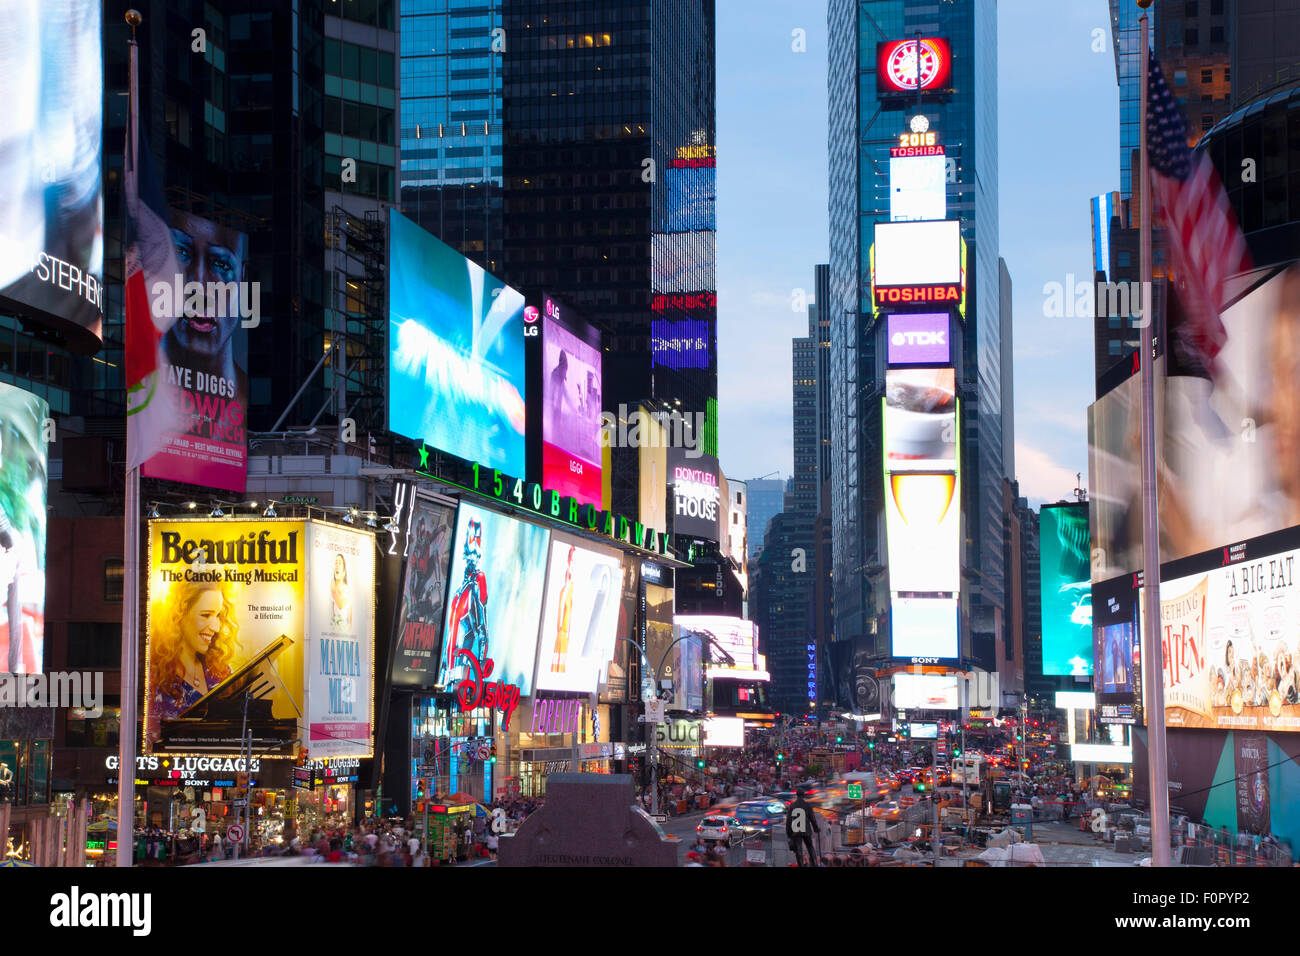 USA, New York State, New York City, Manhattan, Crowds of tourists in illuminated Times Square at night. Stock Photo